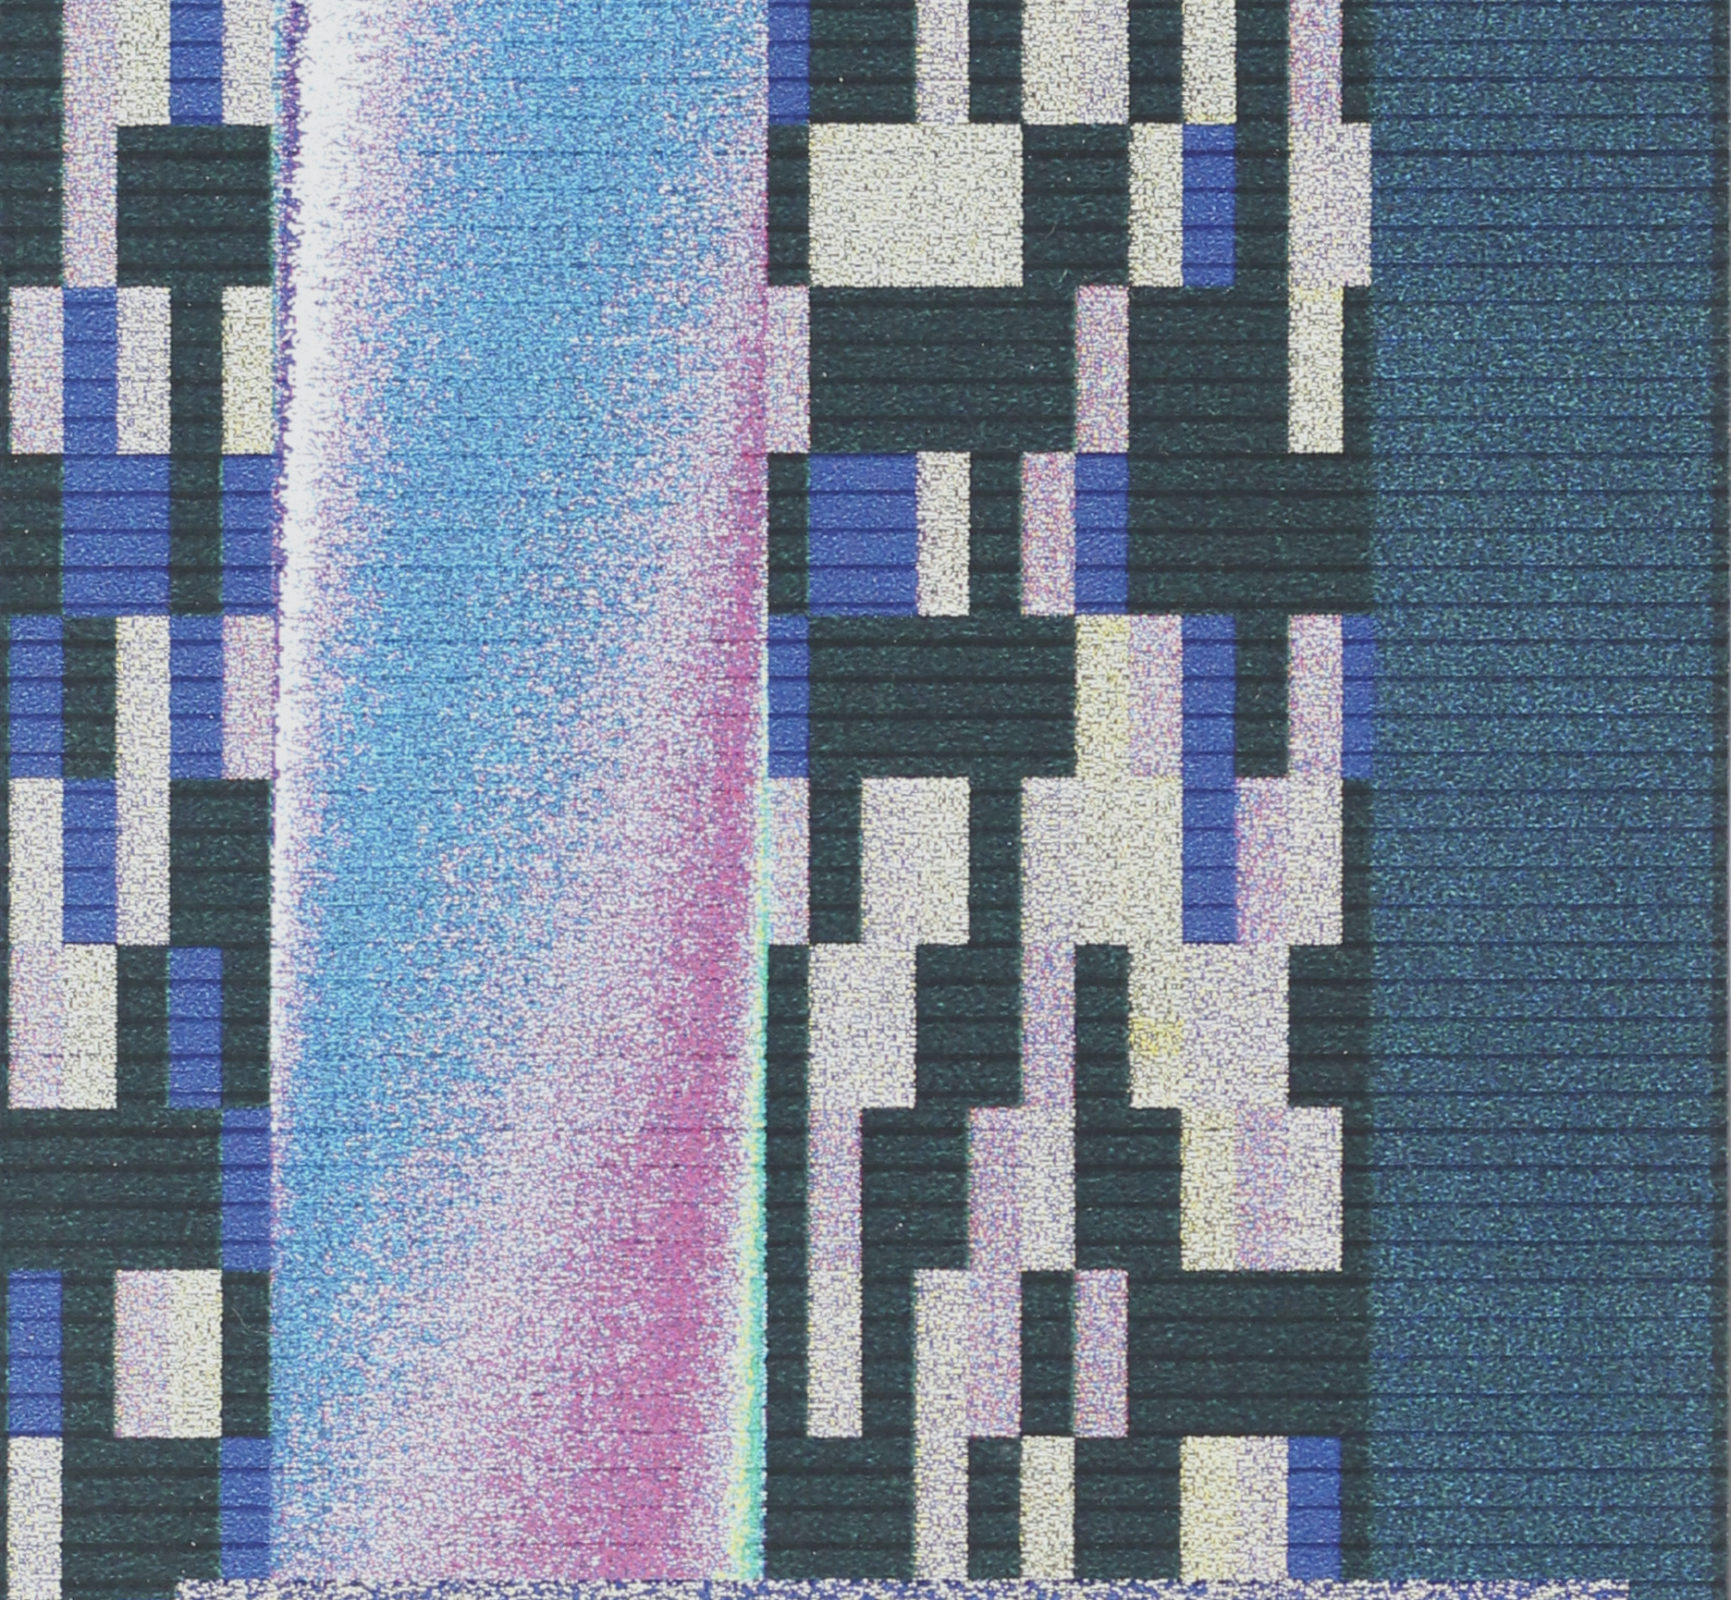 Georg Nees, Support, digital print, 24,5 x 18 cm, 1987, signed G.Nees, unique.